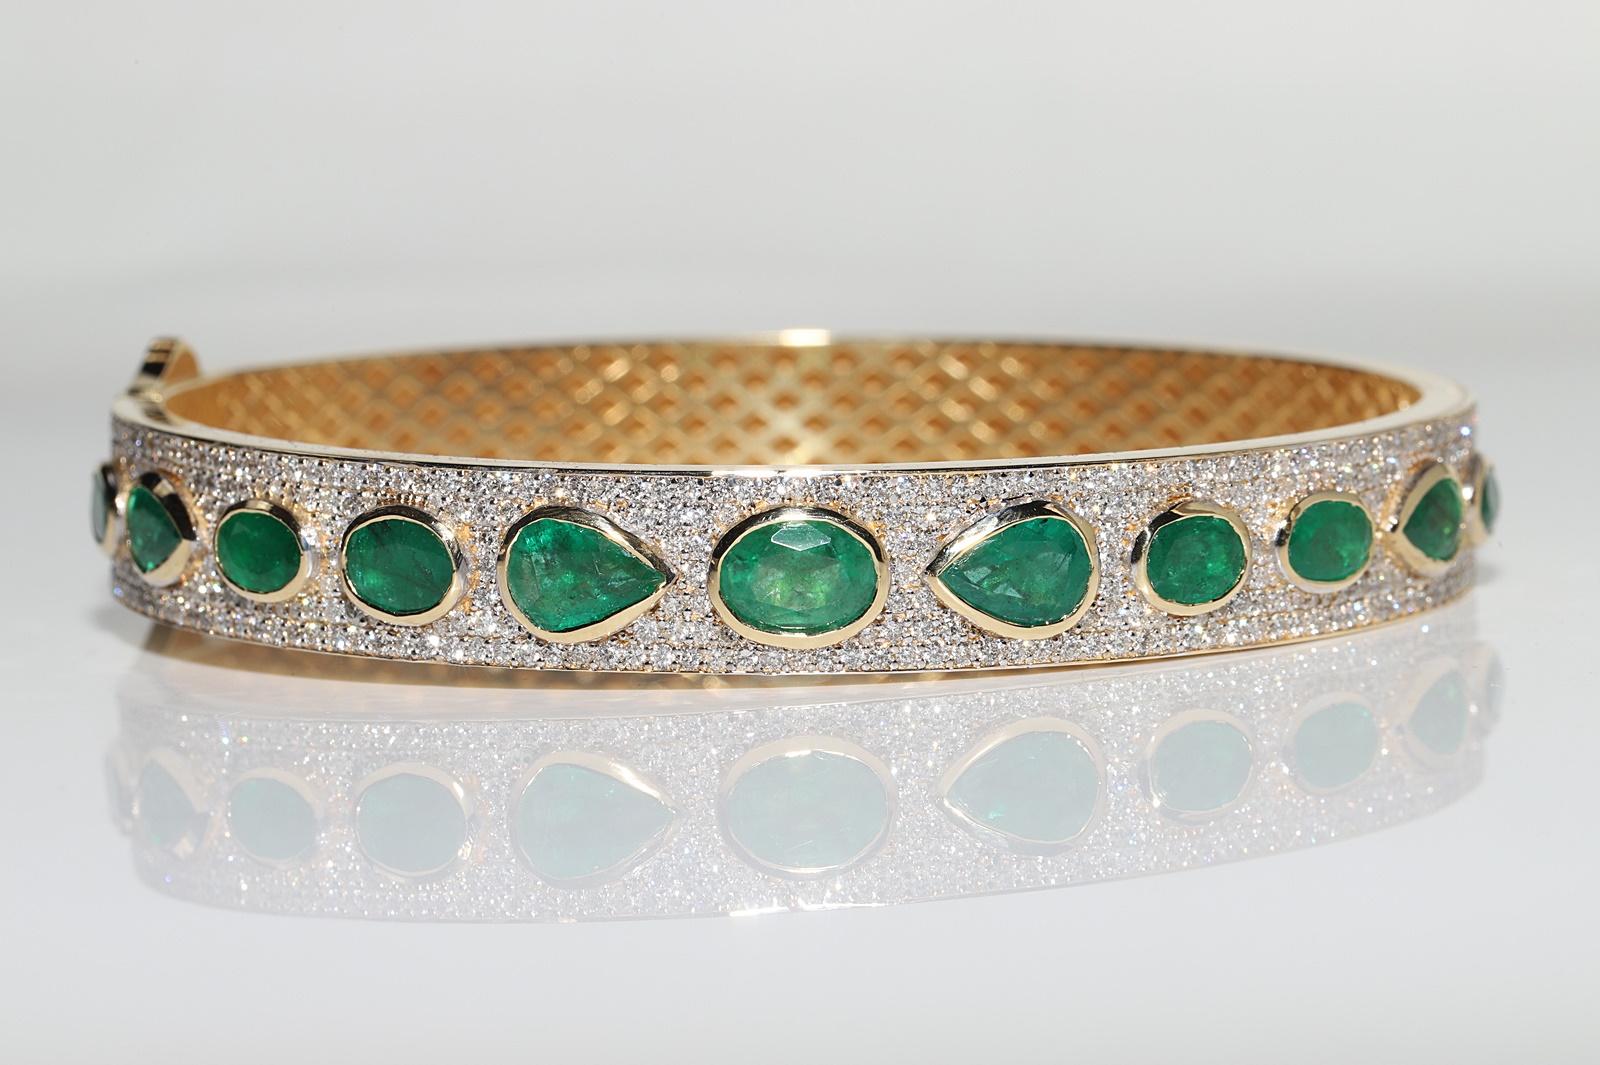 Vintage Circa 1990s 18k Gold Natural Diamond And Emerald Bangle Bracelet In Good Condition For Sale In Fatih/İstanbul, 34